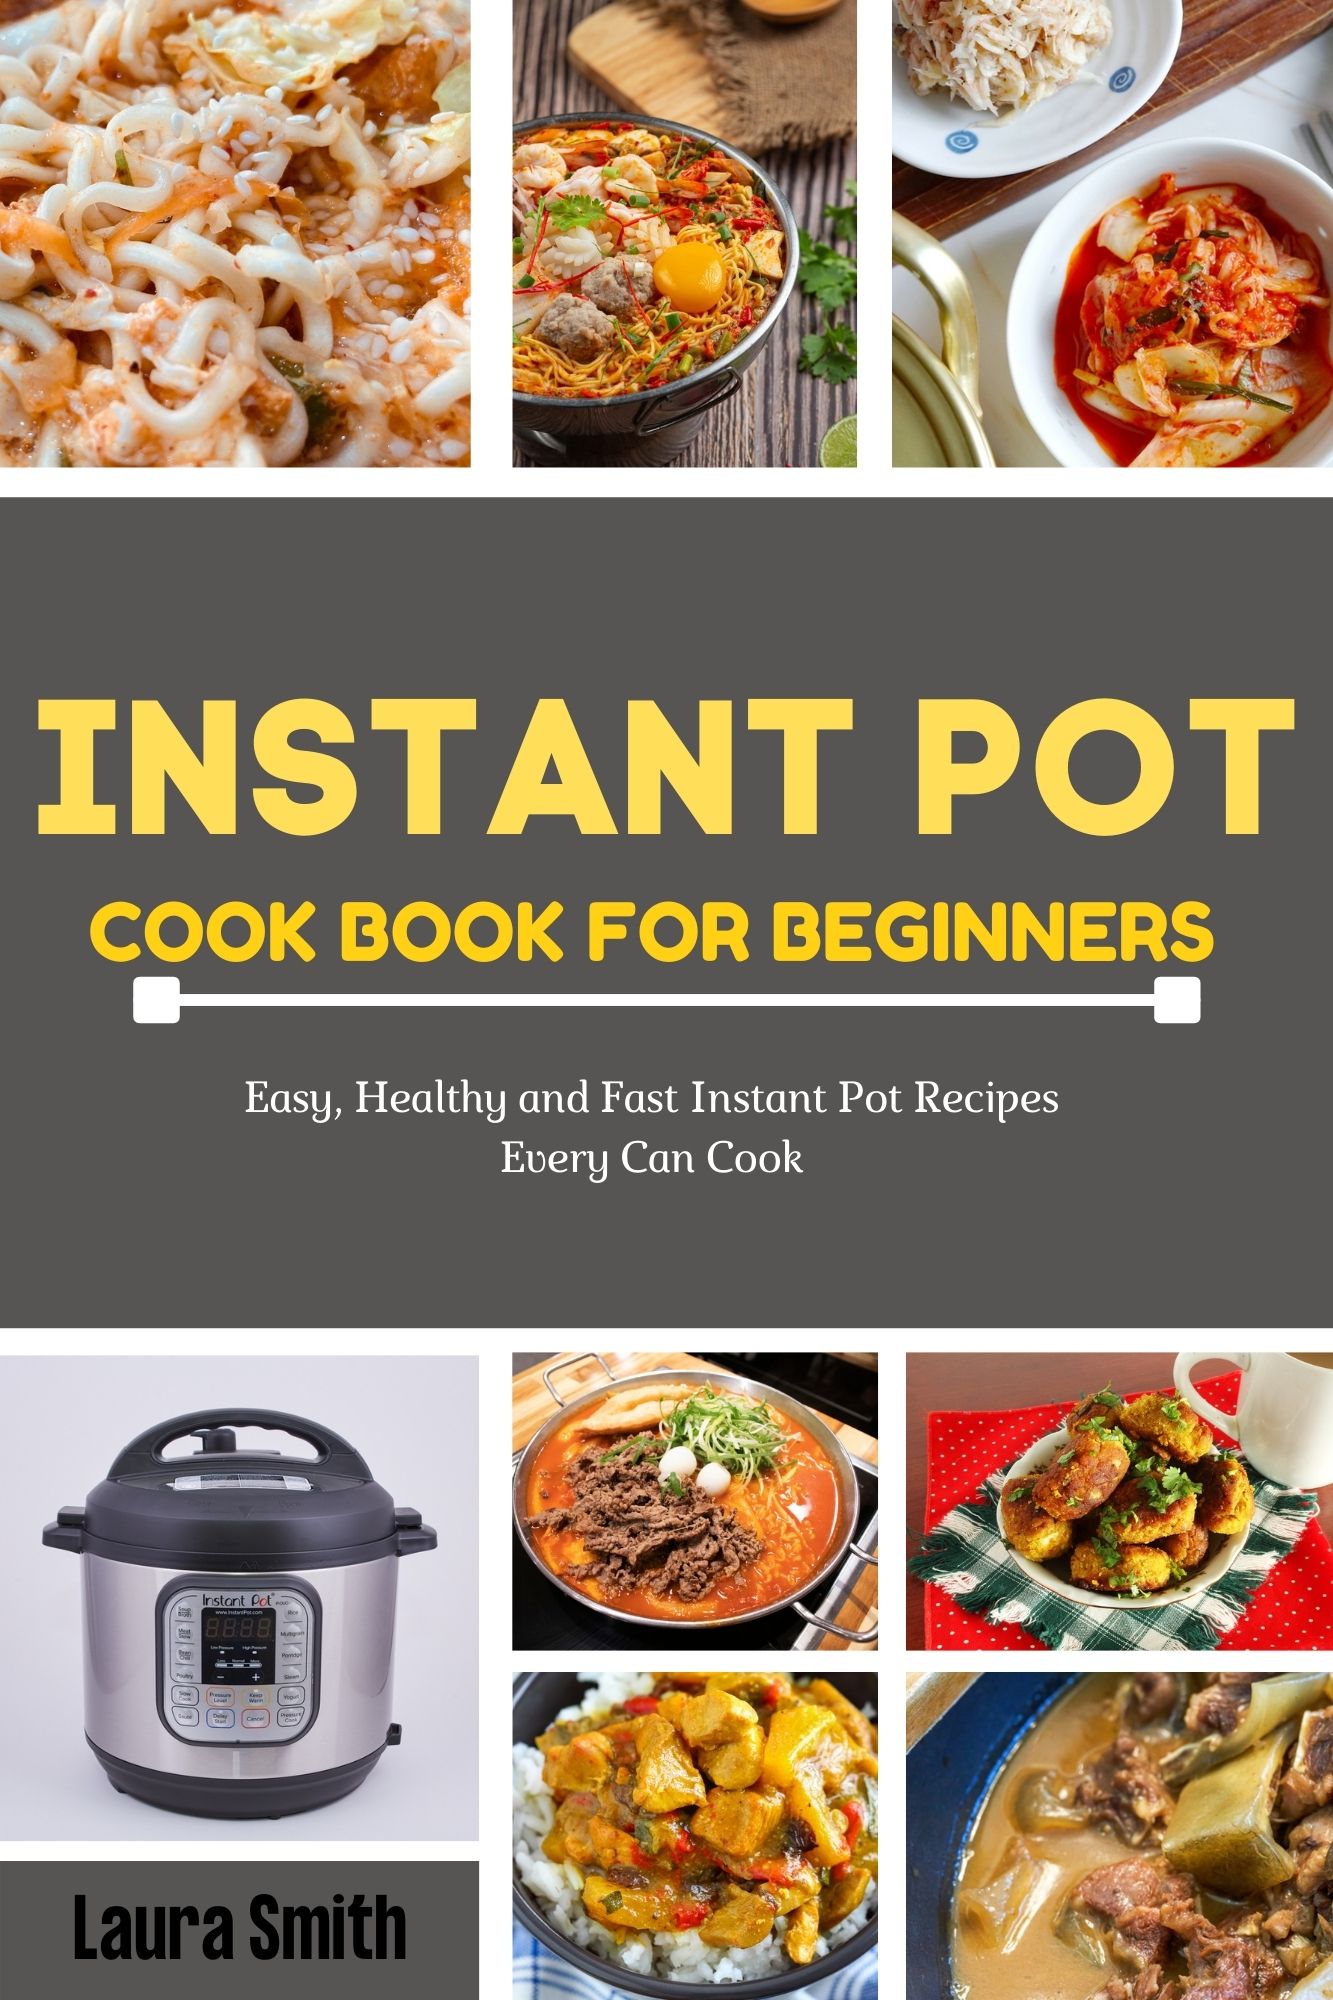 FREE: Instant pot cookbook for beginners by Laura Smith